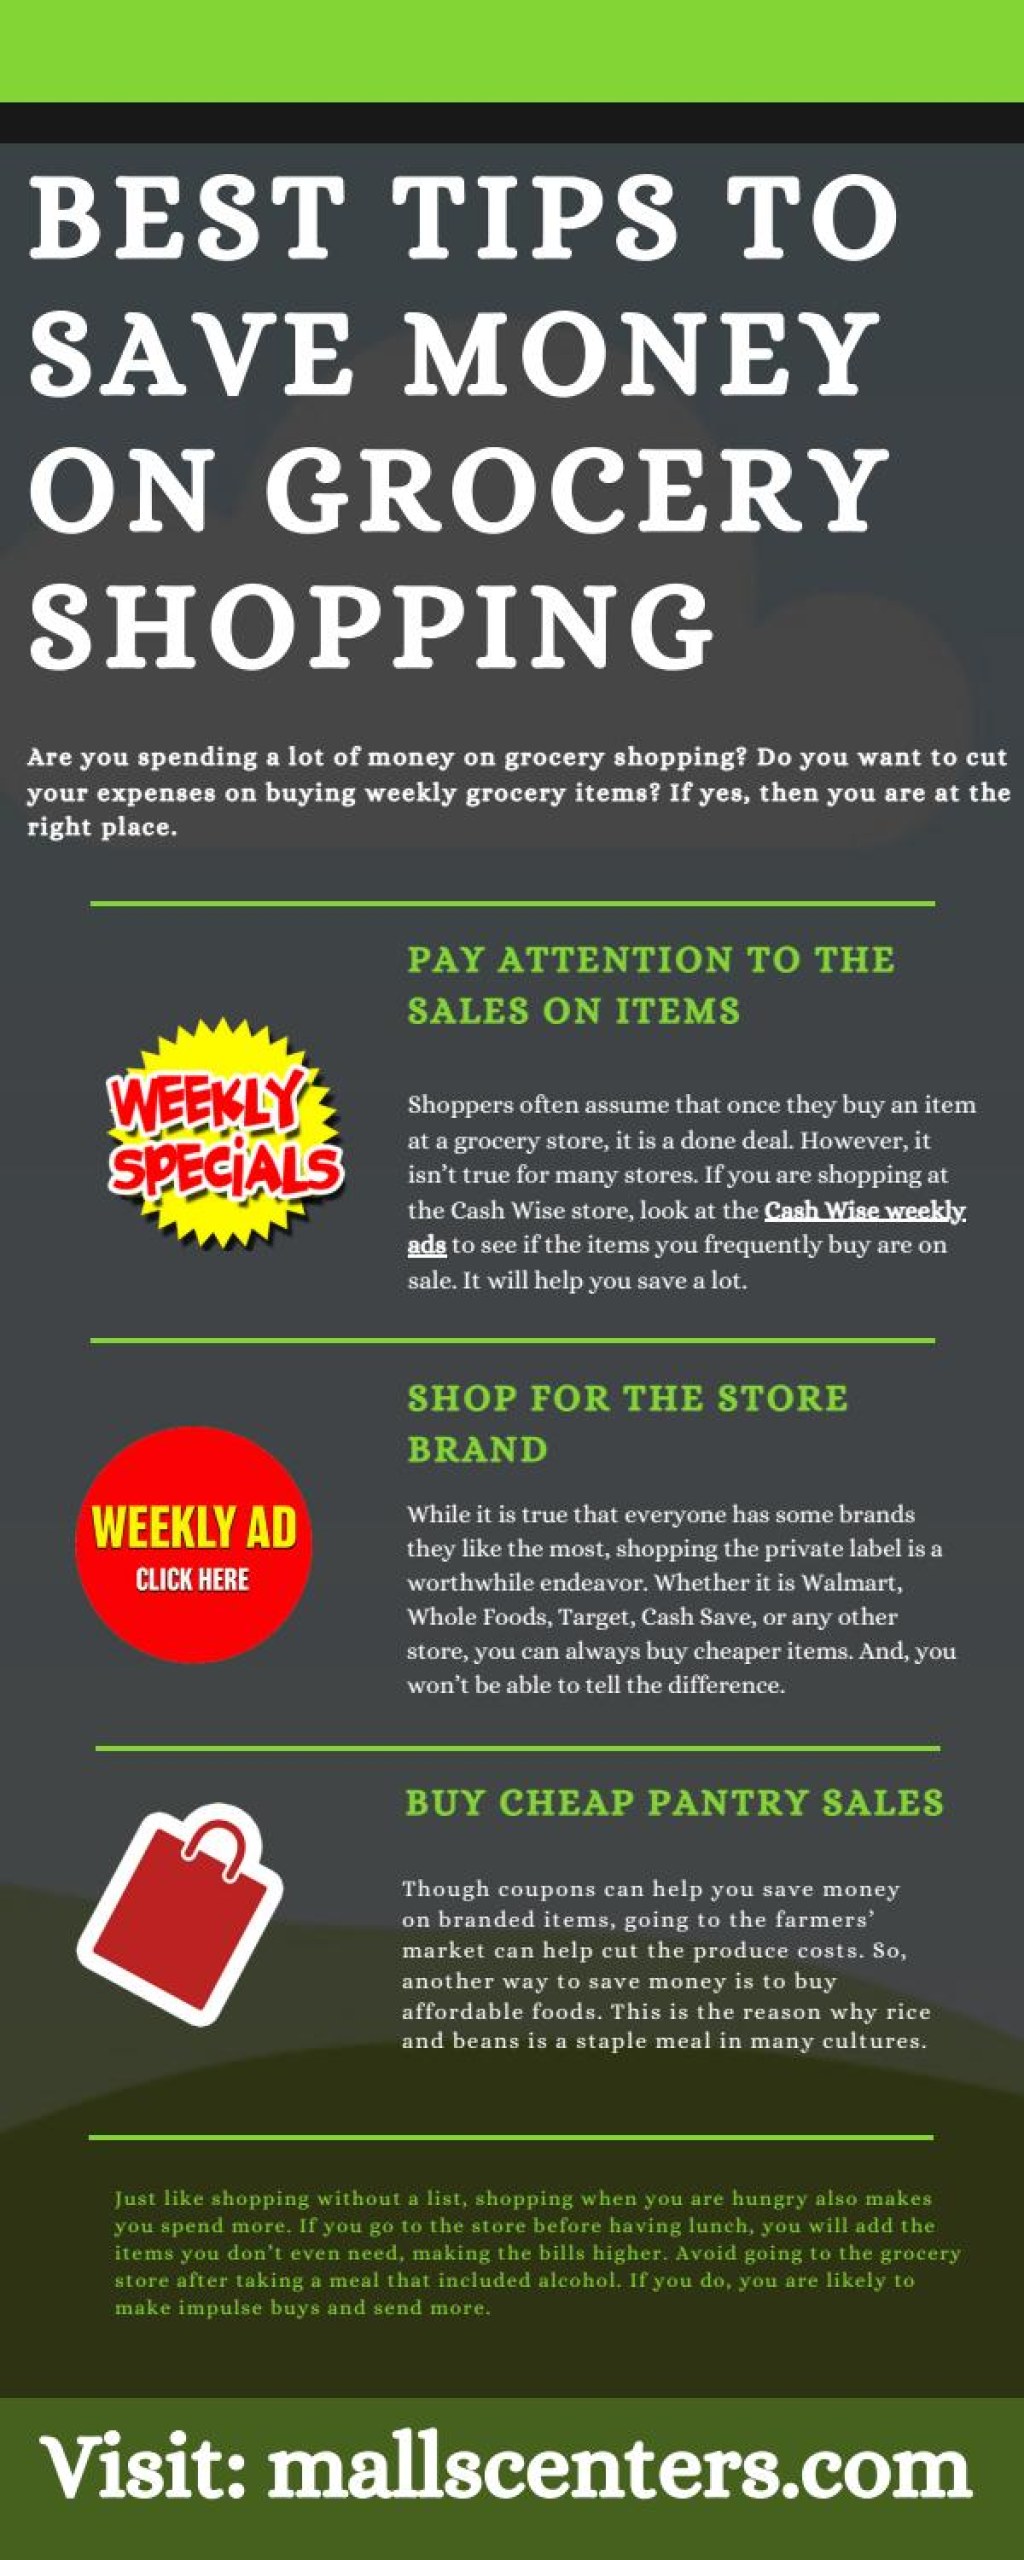 Picture of: Best tips to save money on grocery shopping.